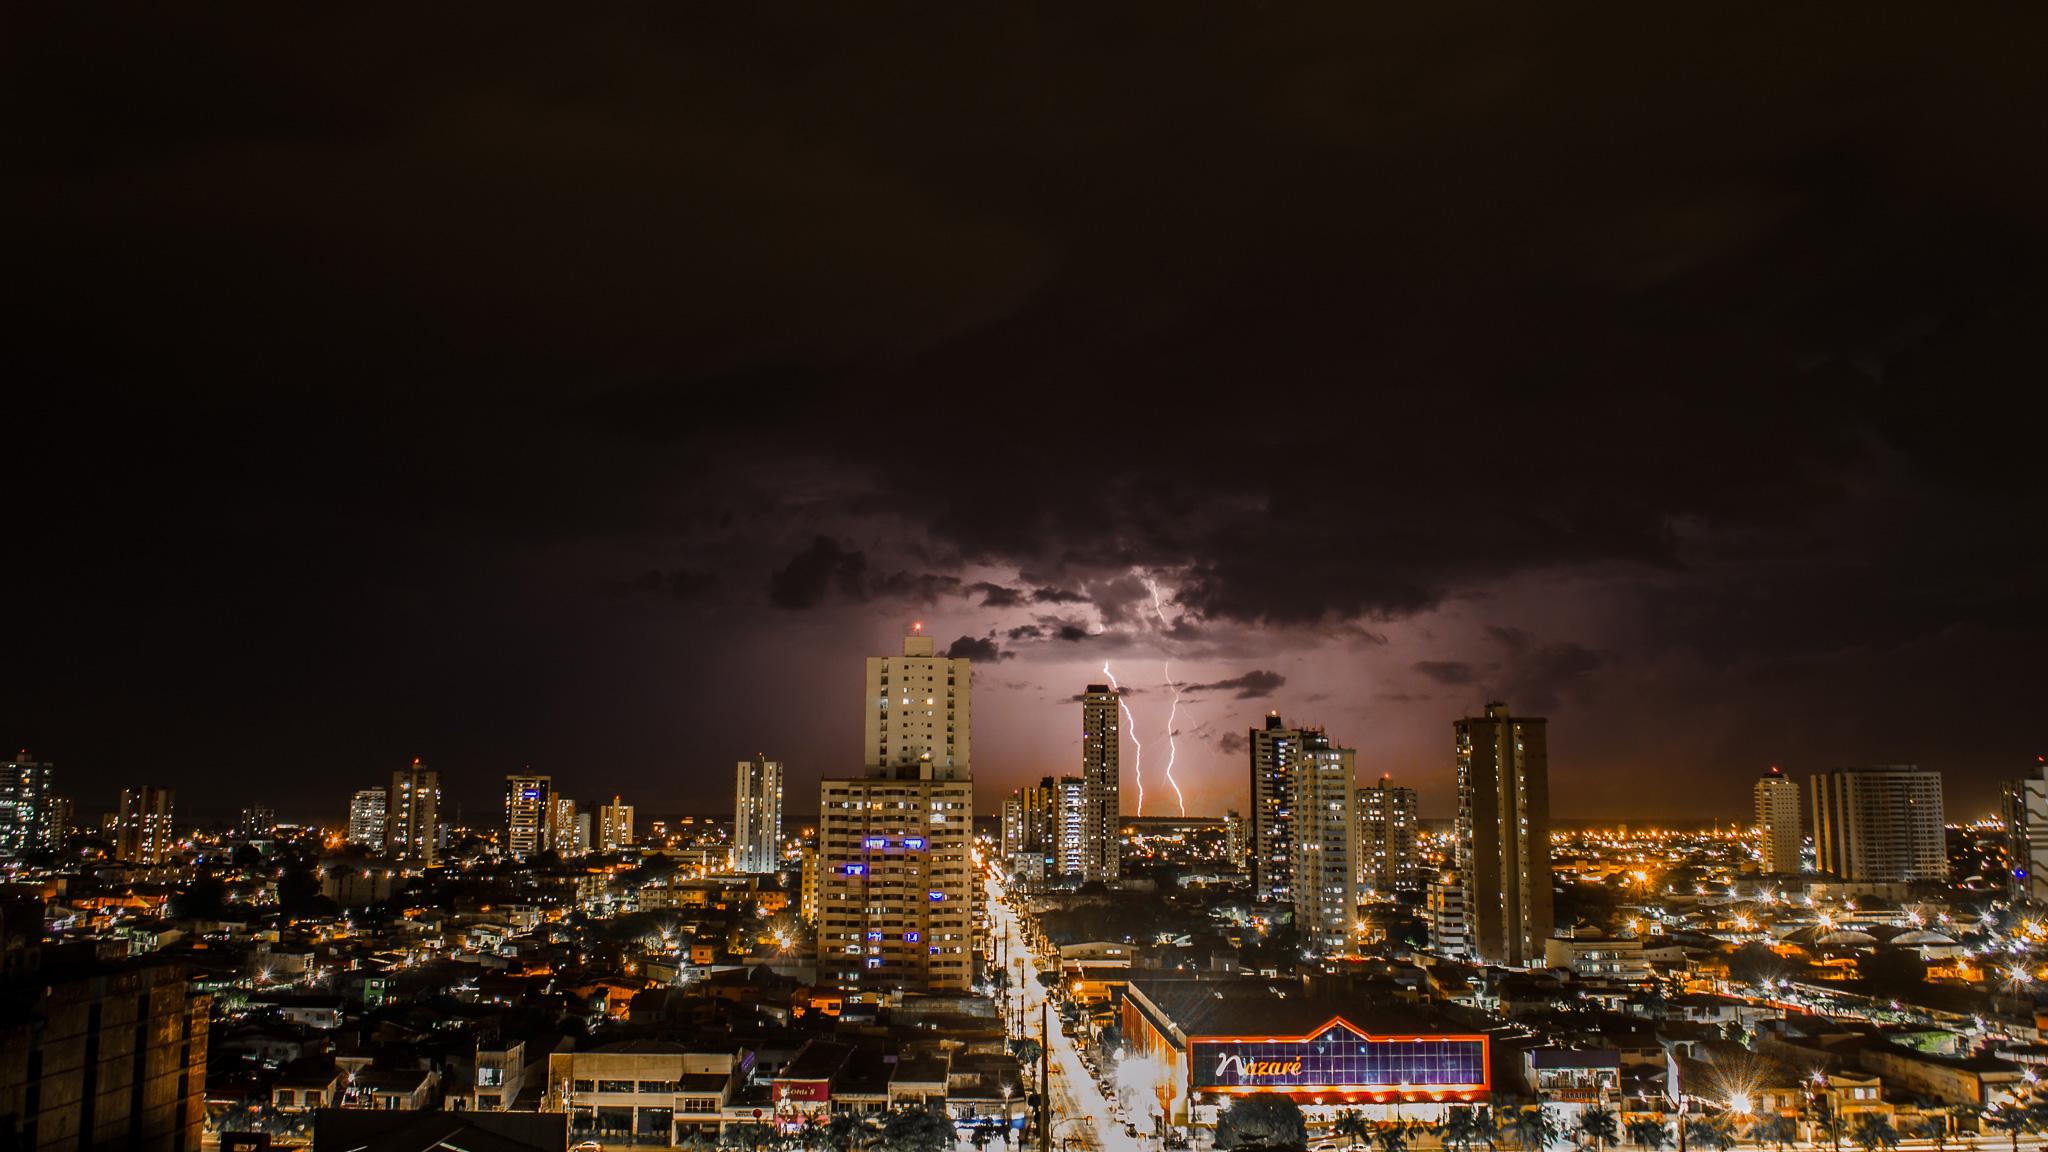 HD wallpaper, Photography Wallpapers, Thunderstorm Wallpapers, Night Wallpapers, Thunderstorms Above City During Night Time, Lightning Wallpapers, Hd Wallpapers, Evening Wallpapers, City Wallpapers